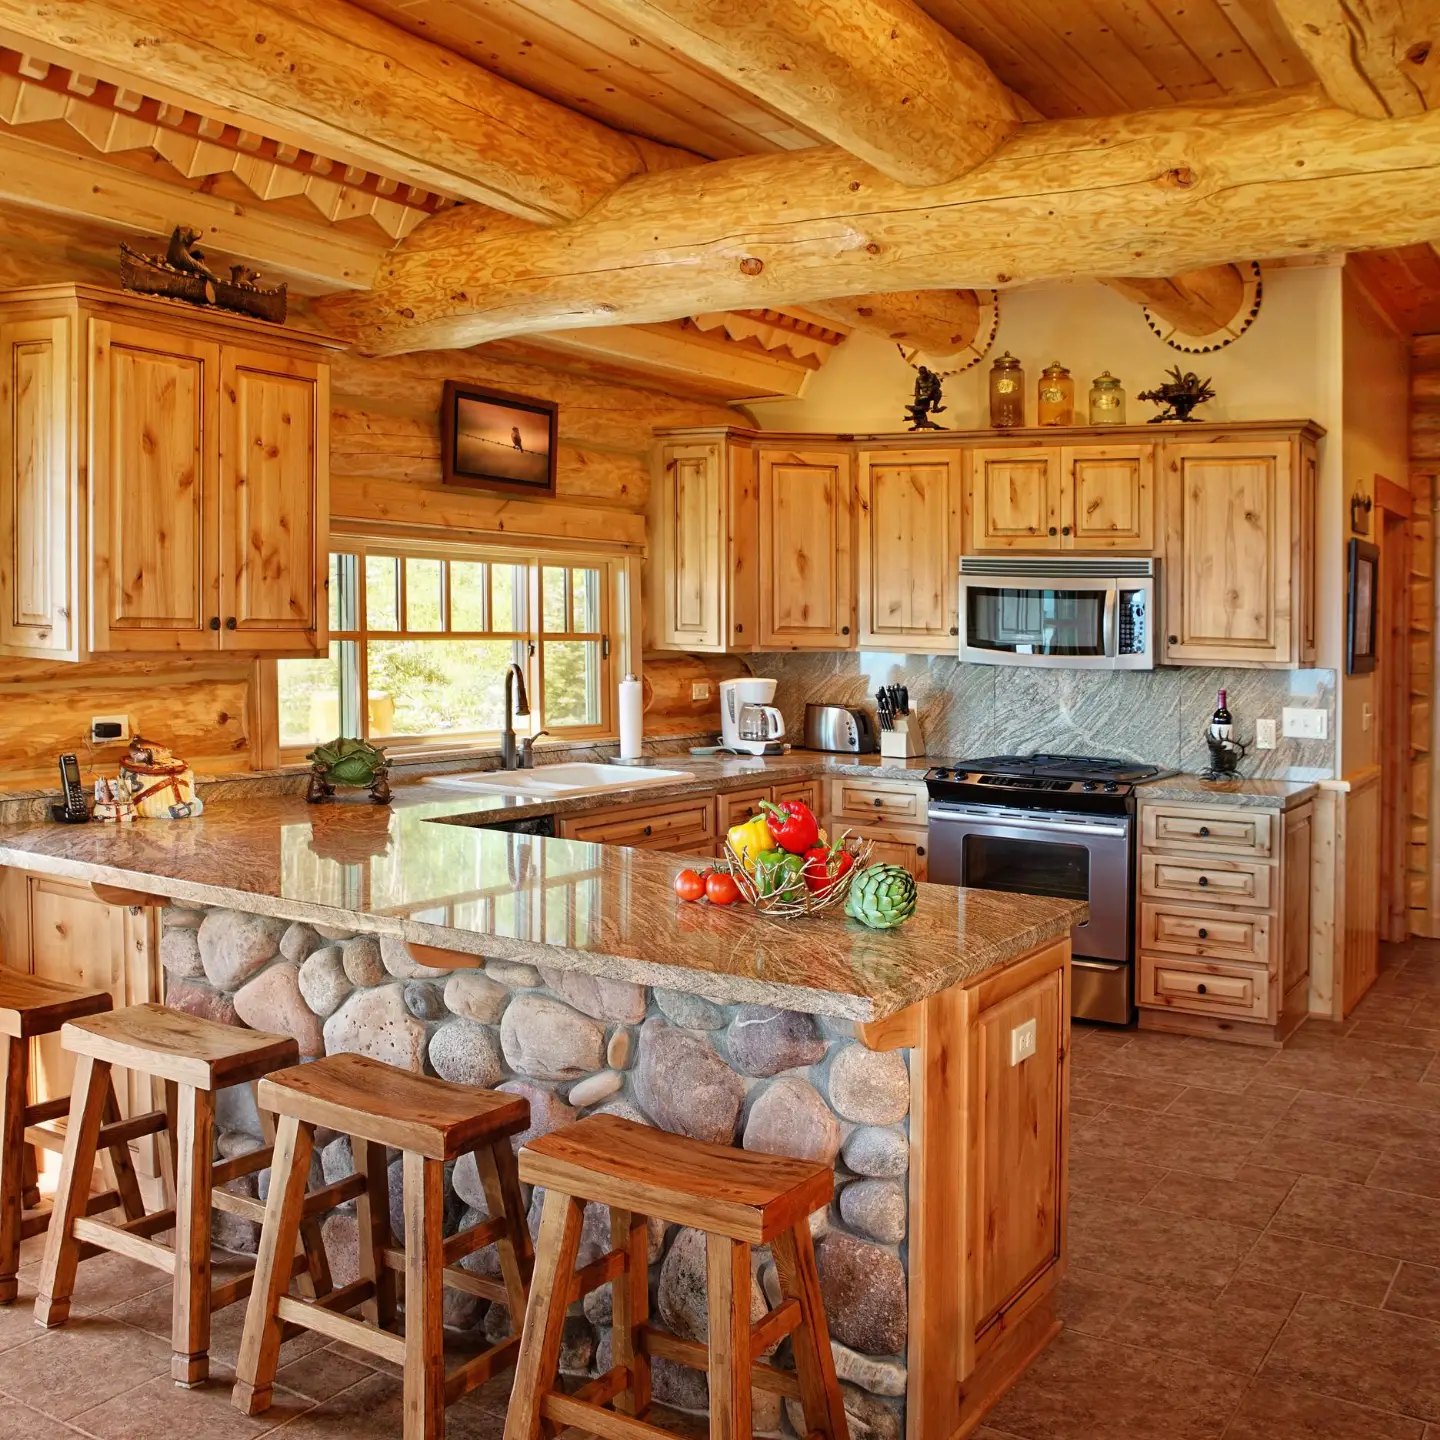 The Best Places to Buy Traditional Rustic Cabin Furniture Online